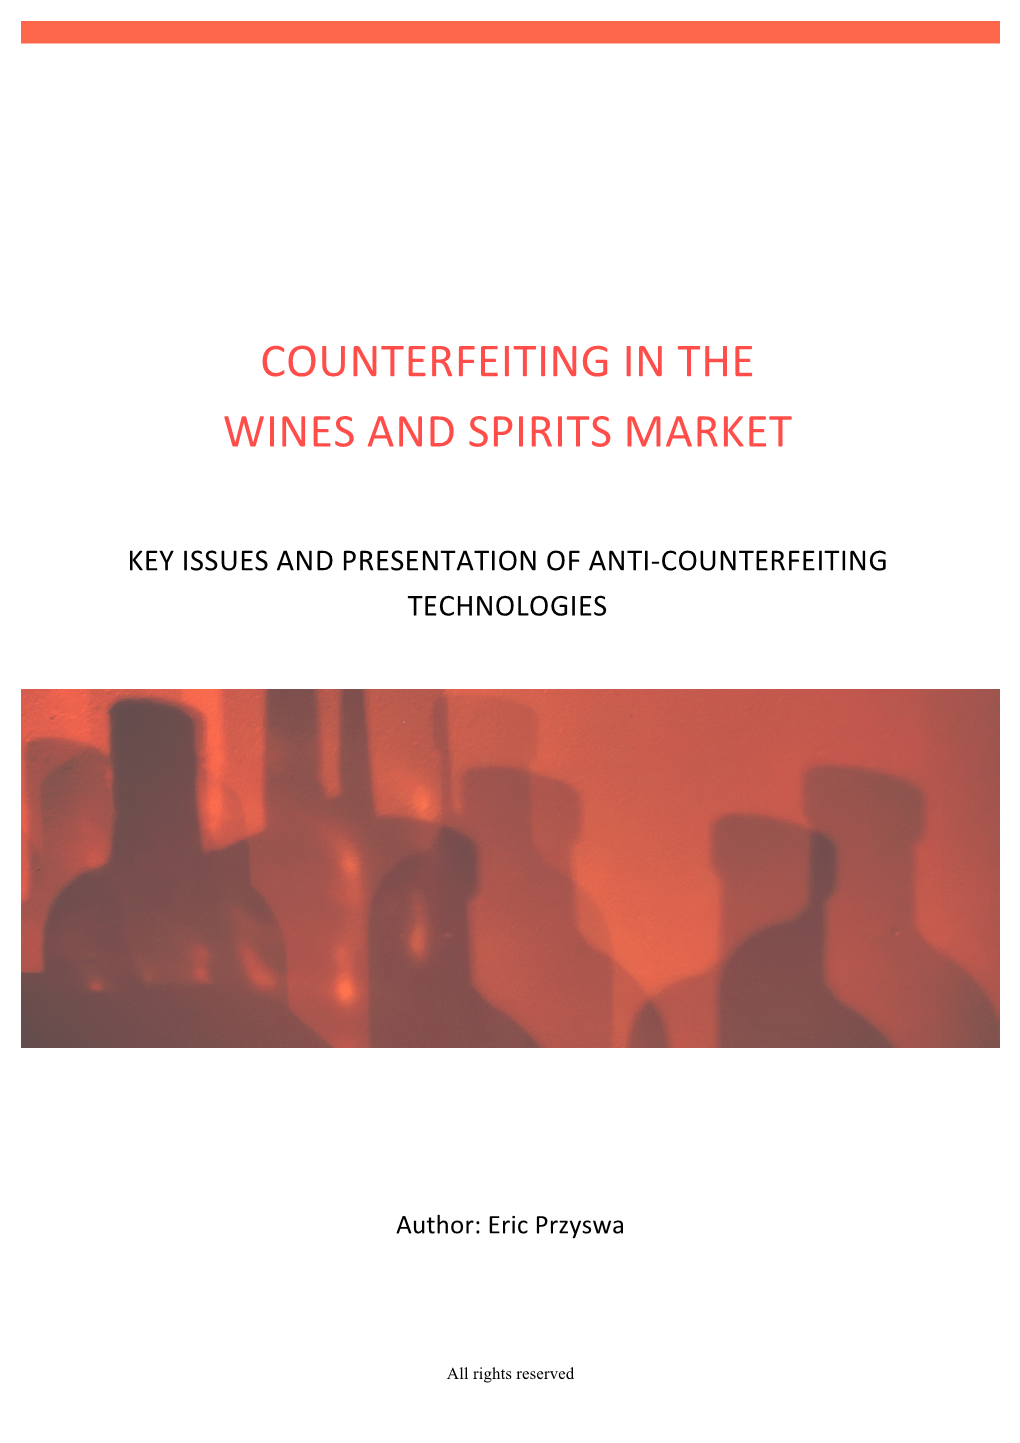 Counterfeiting in the Wines and Spirits Market